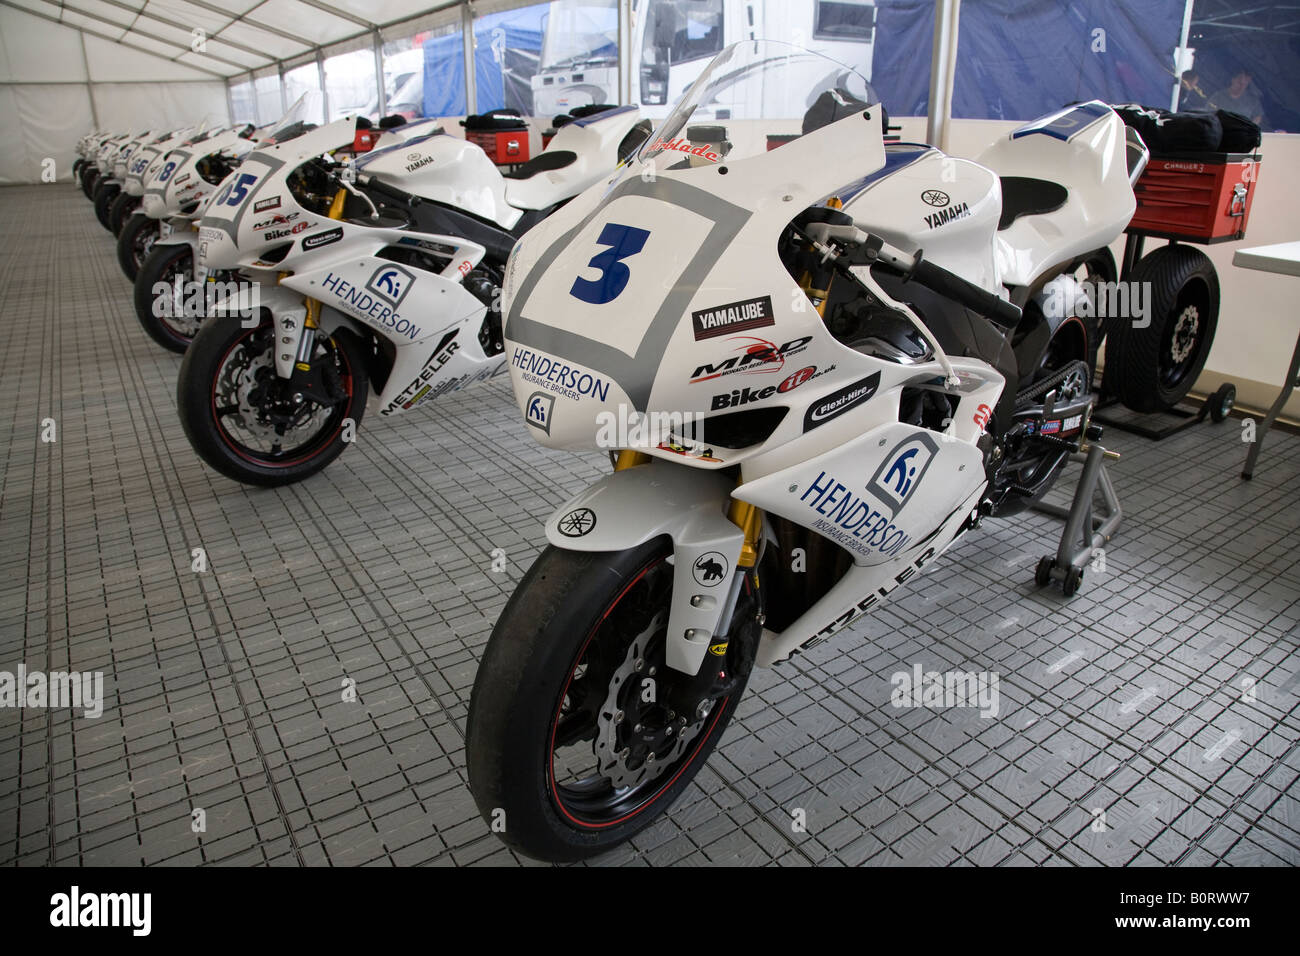 A row of Yamaha R1 motorcycles awaiting their riders in the Henderson Yamaha R1 Cup at Brands Hatch, Kent, England. Stock Photo